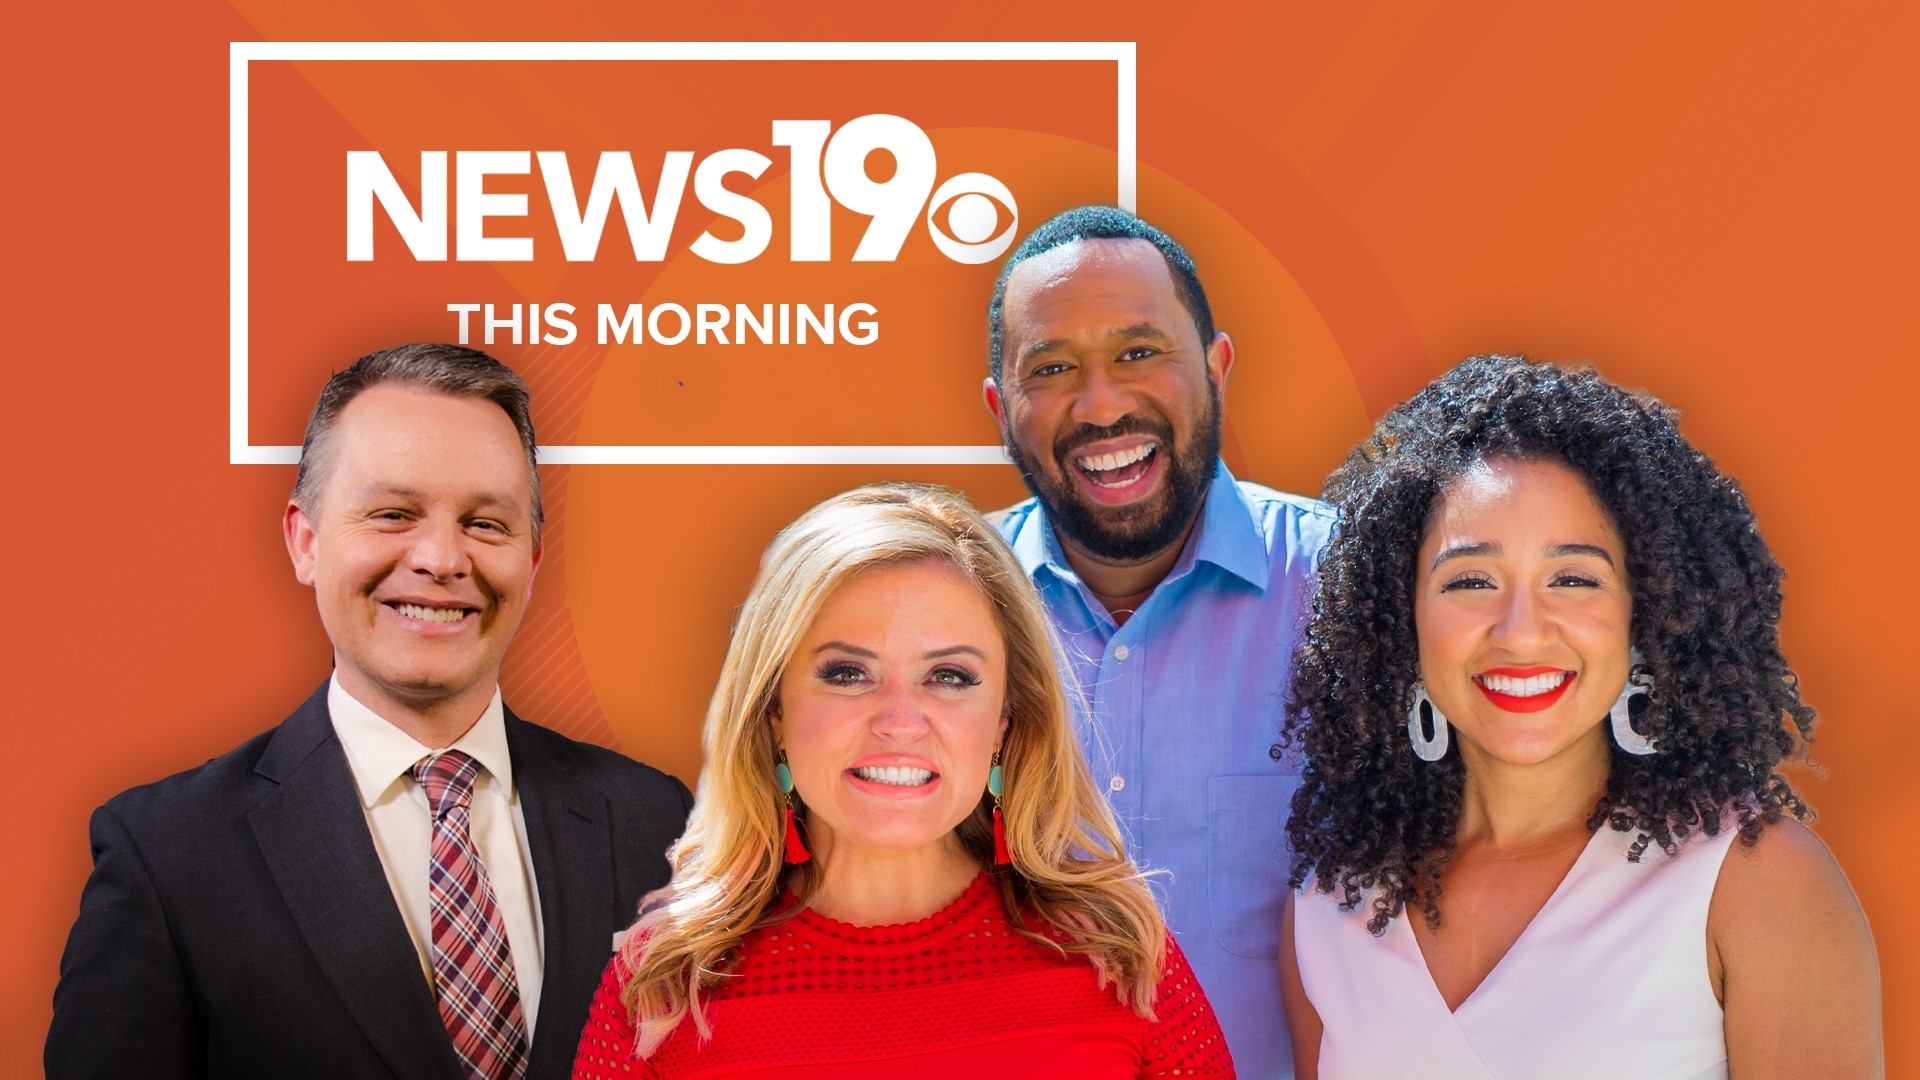 Current news and events of the day, local topics in the Columbia area, weather forecasts, sports and more are covered by the News19 team.